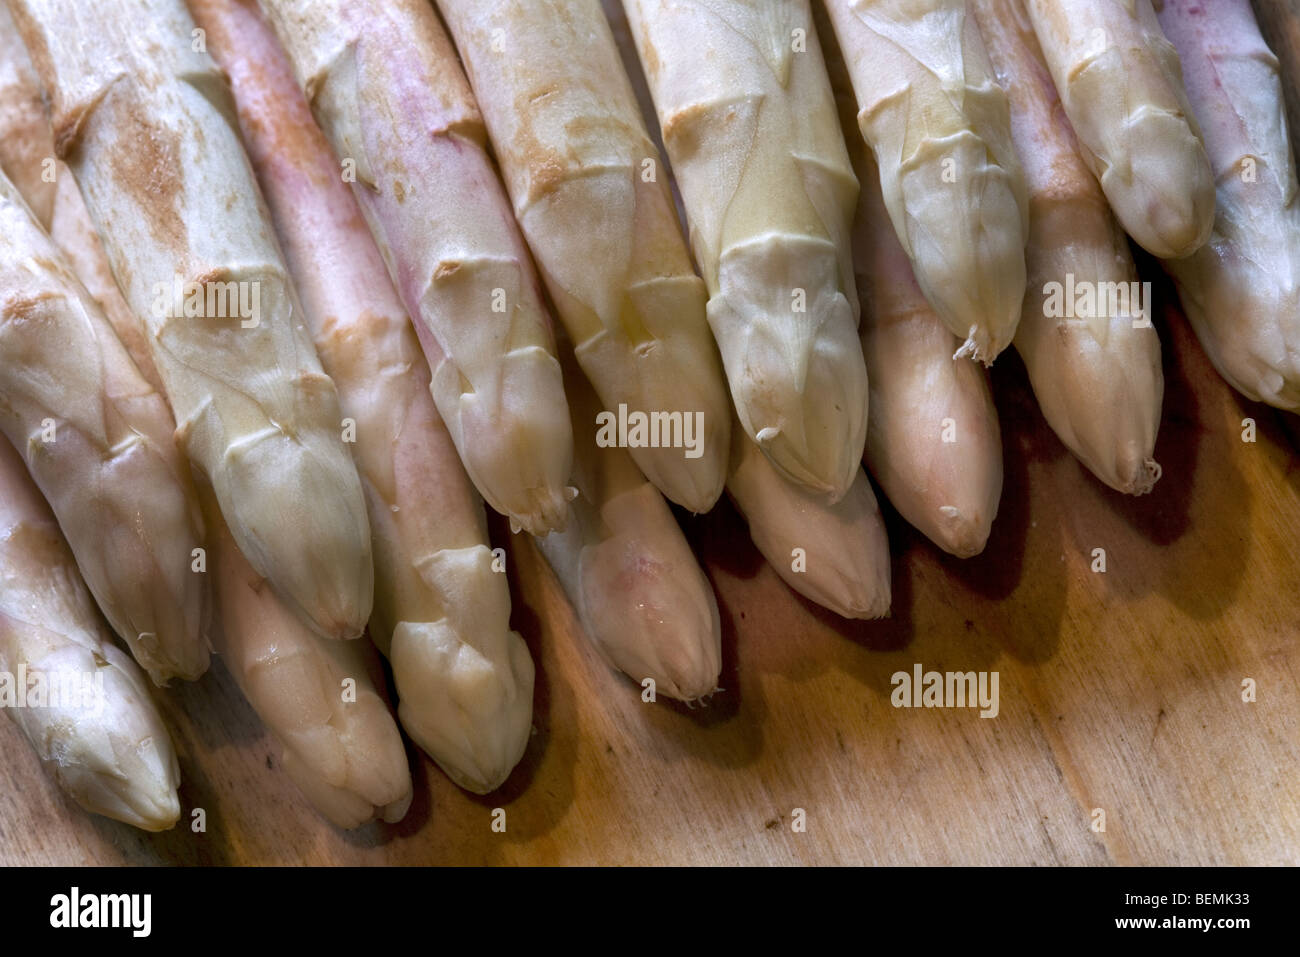 Bundle of harvested white asparagus (Asparagus officinalis) shoots for food consumption Stock Photo